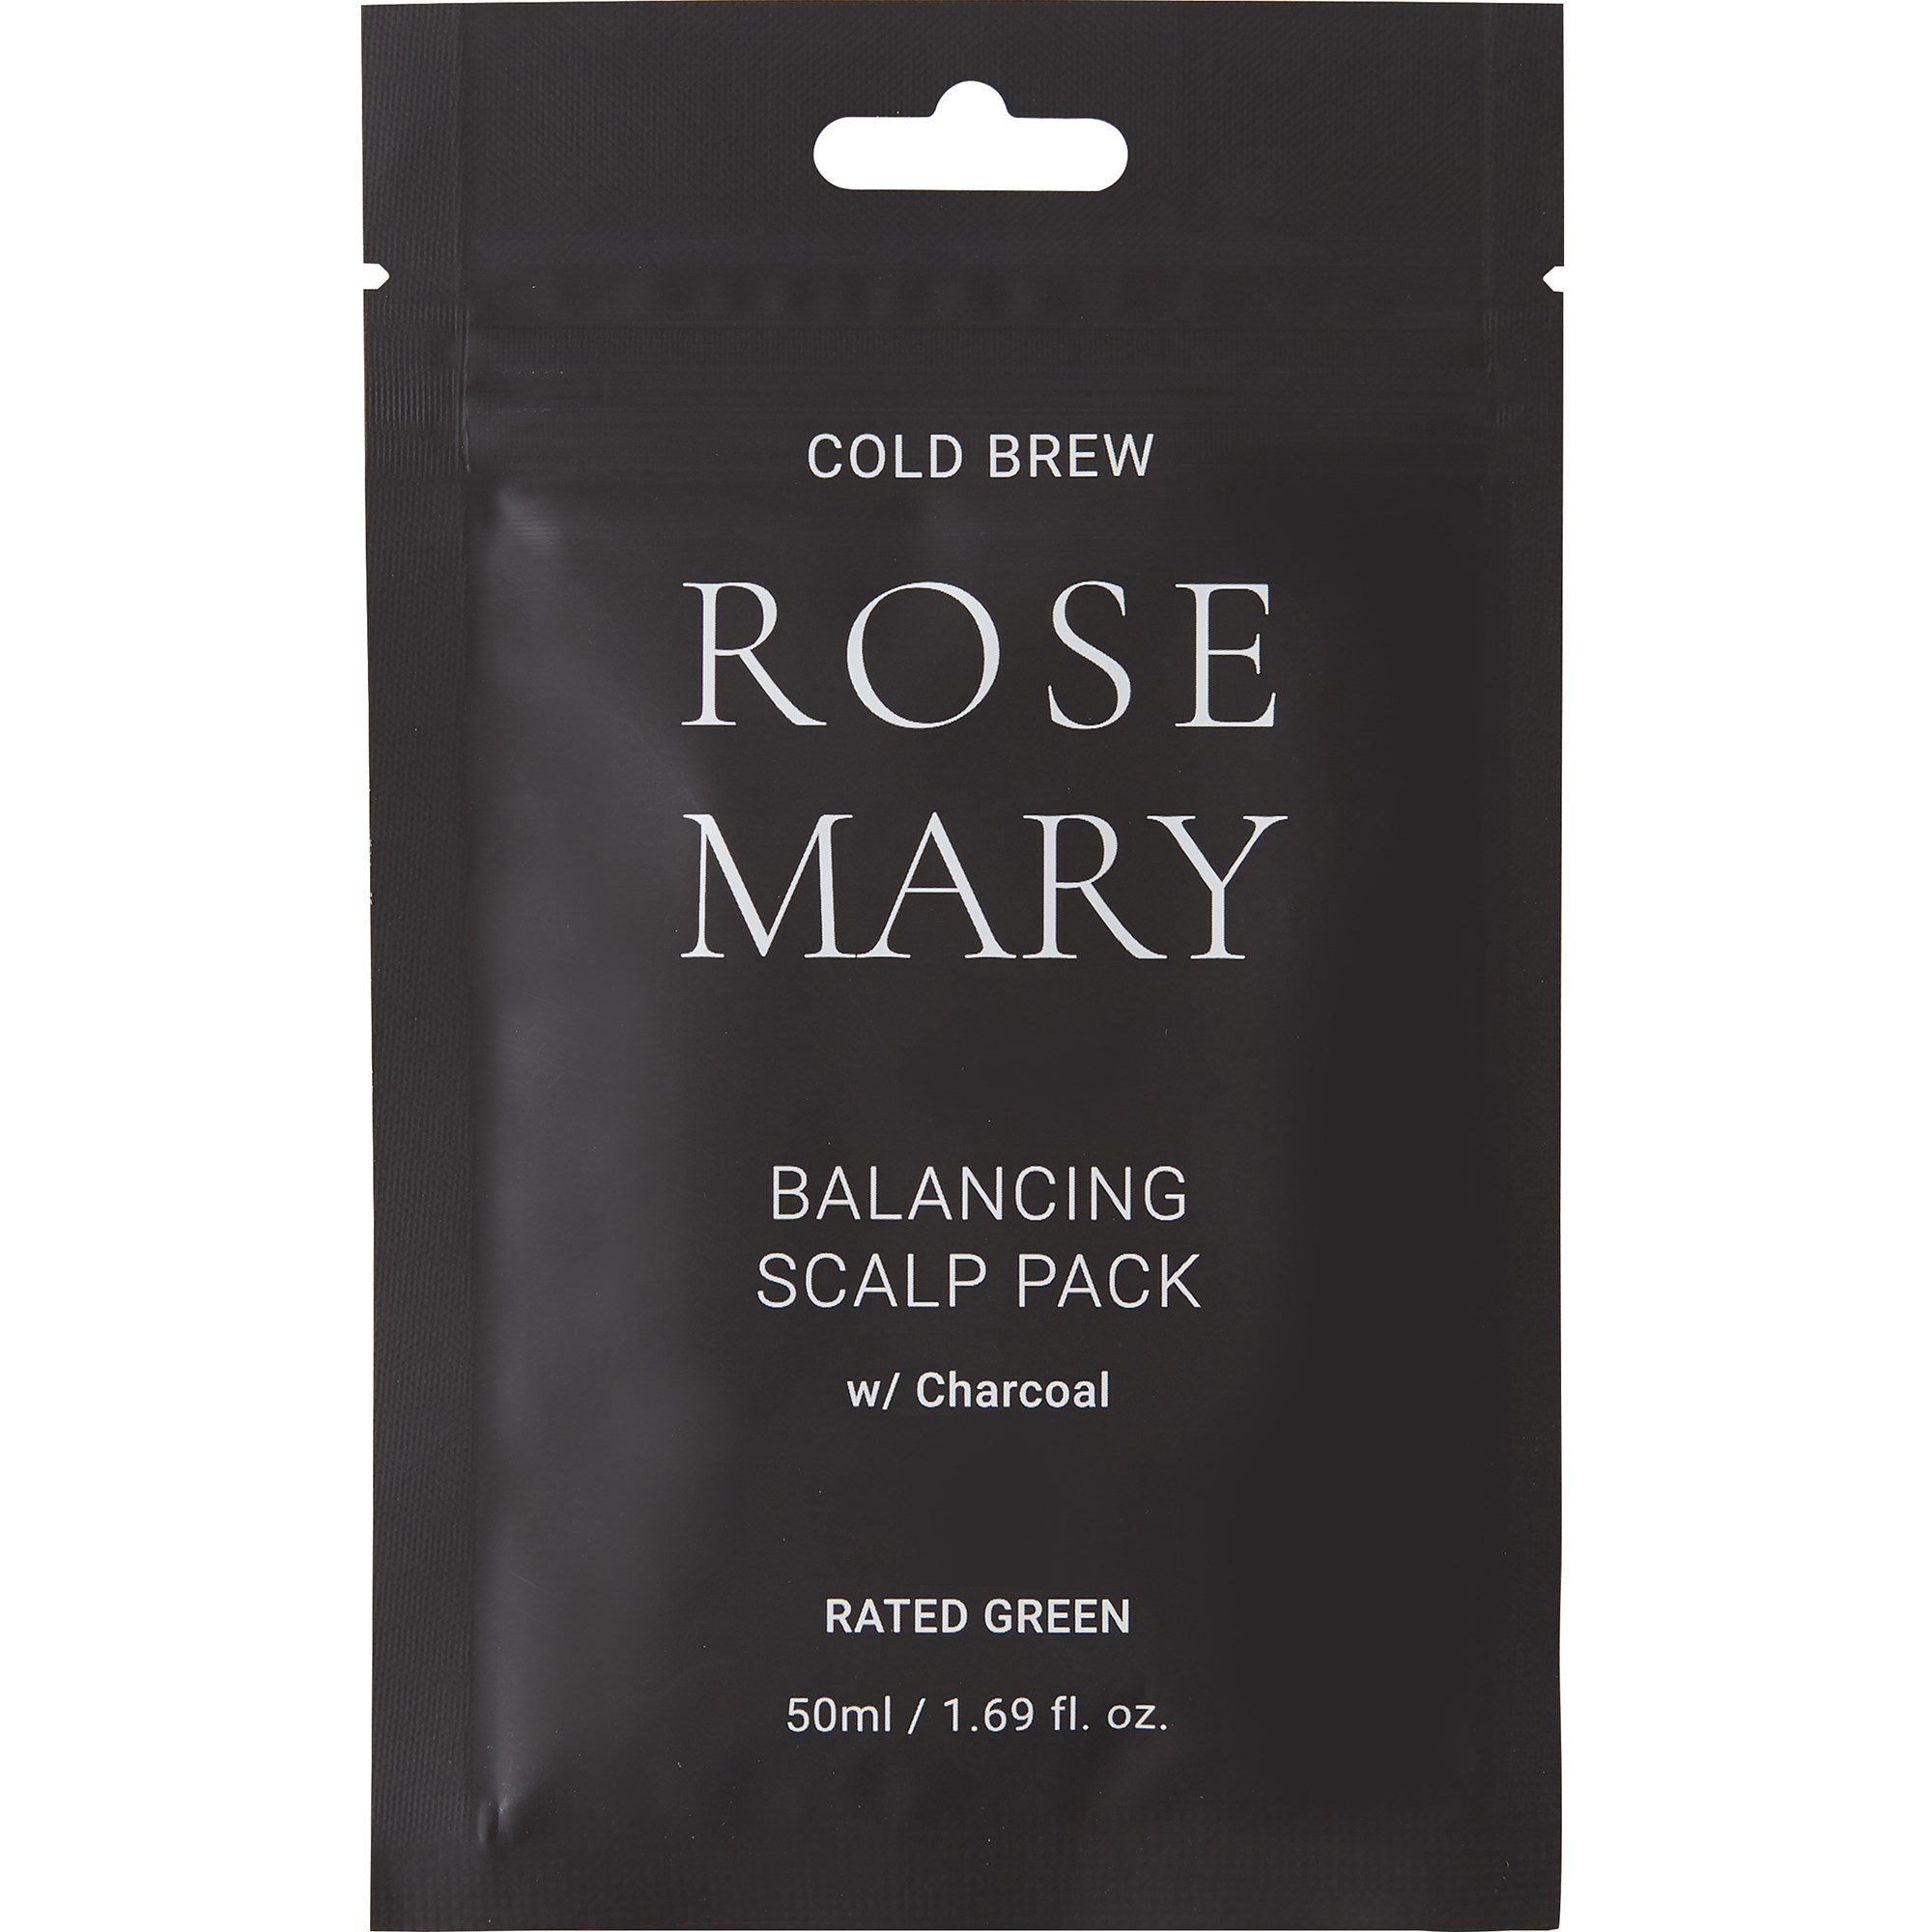 Läs mer om Rated Green Scalp Pack Cold Brew Rosemary Balancing Scalp Pack Charcoa